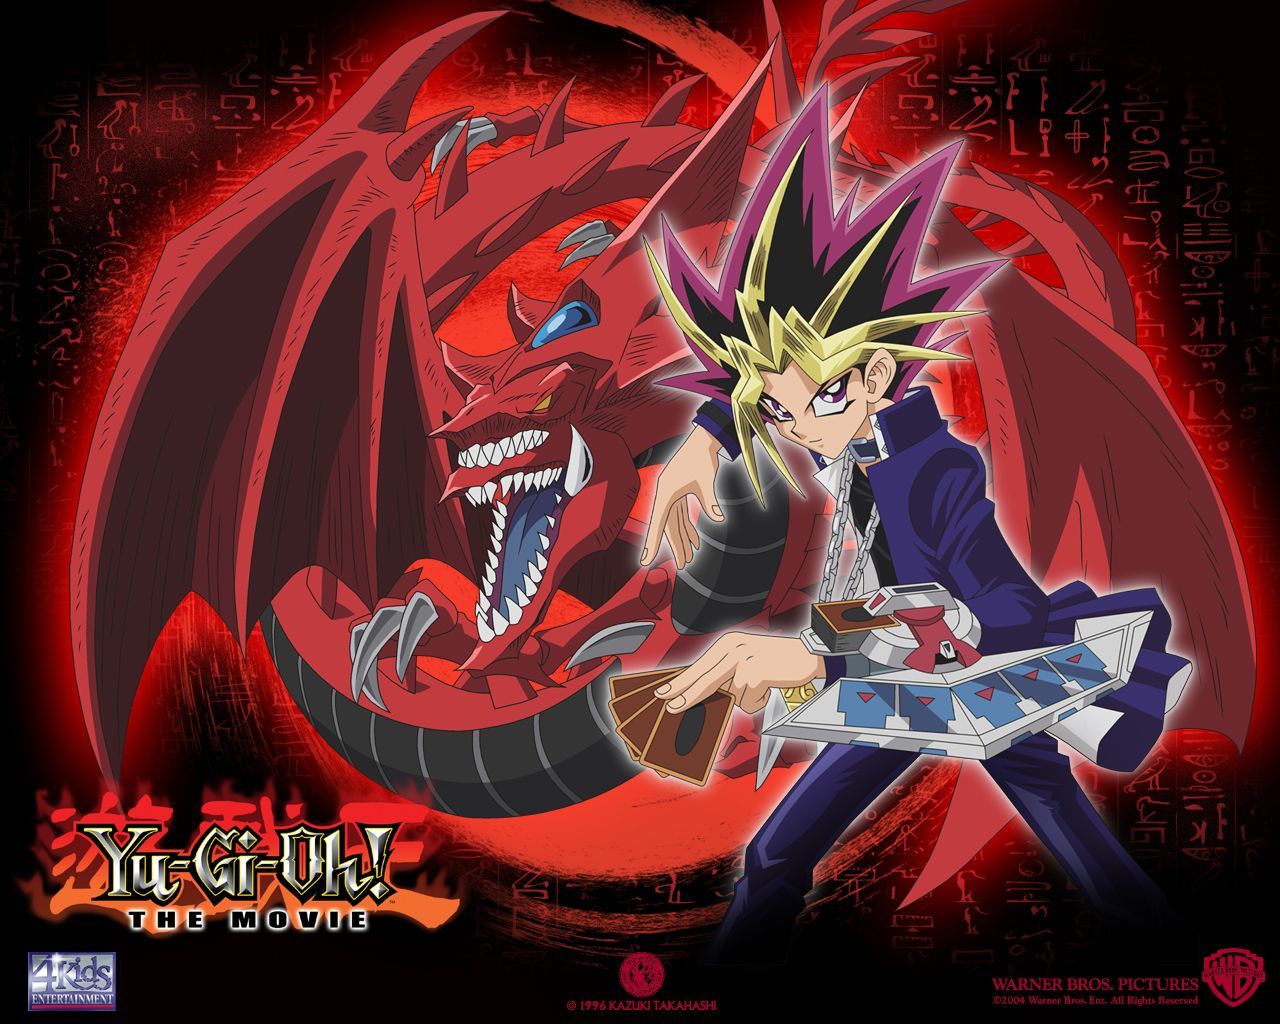 YU GI OH Wallpaper, 12 Desktop Background Drawings For Kids Computers. Anime, Background Drawing, Yugioh